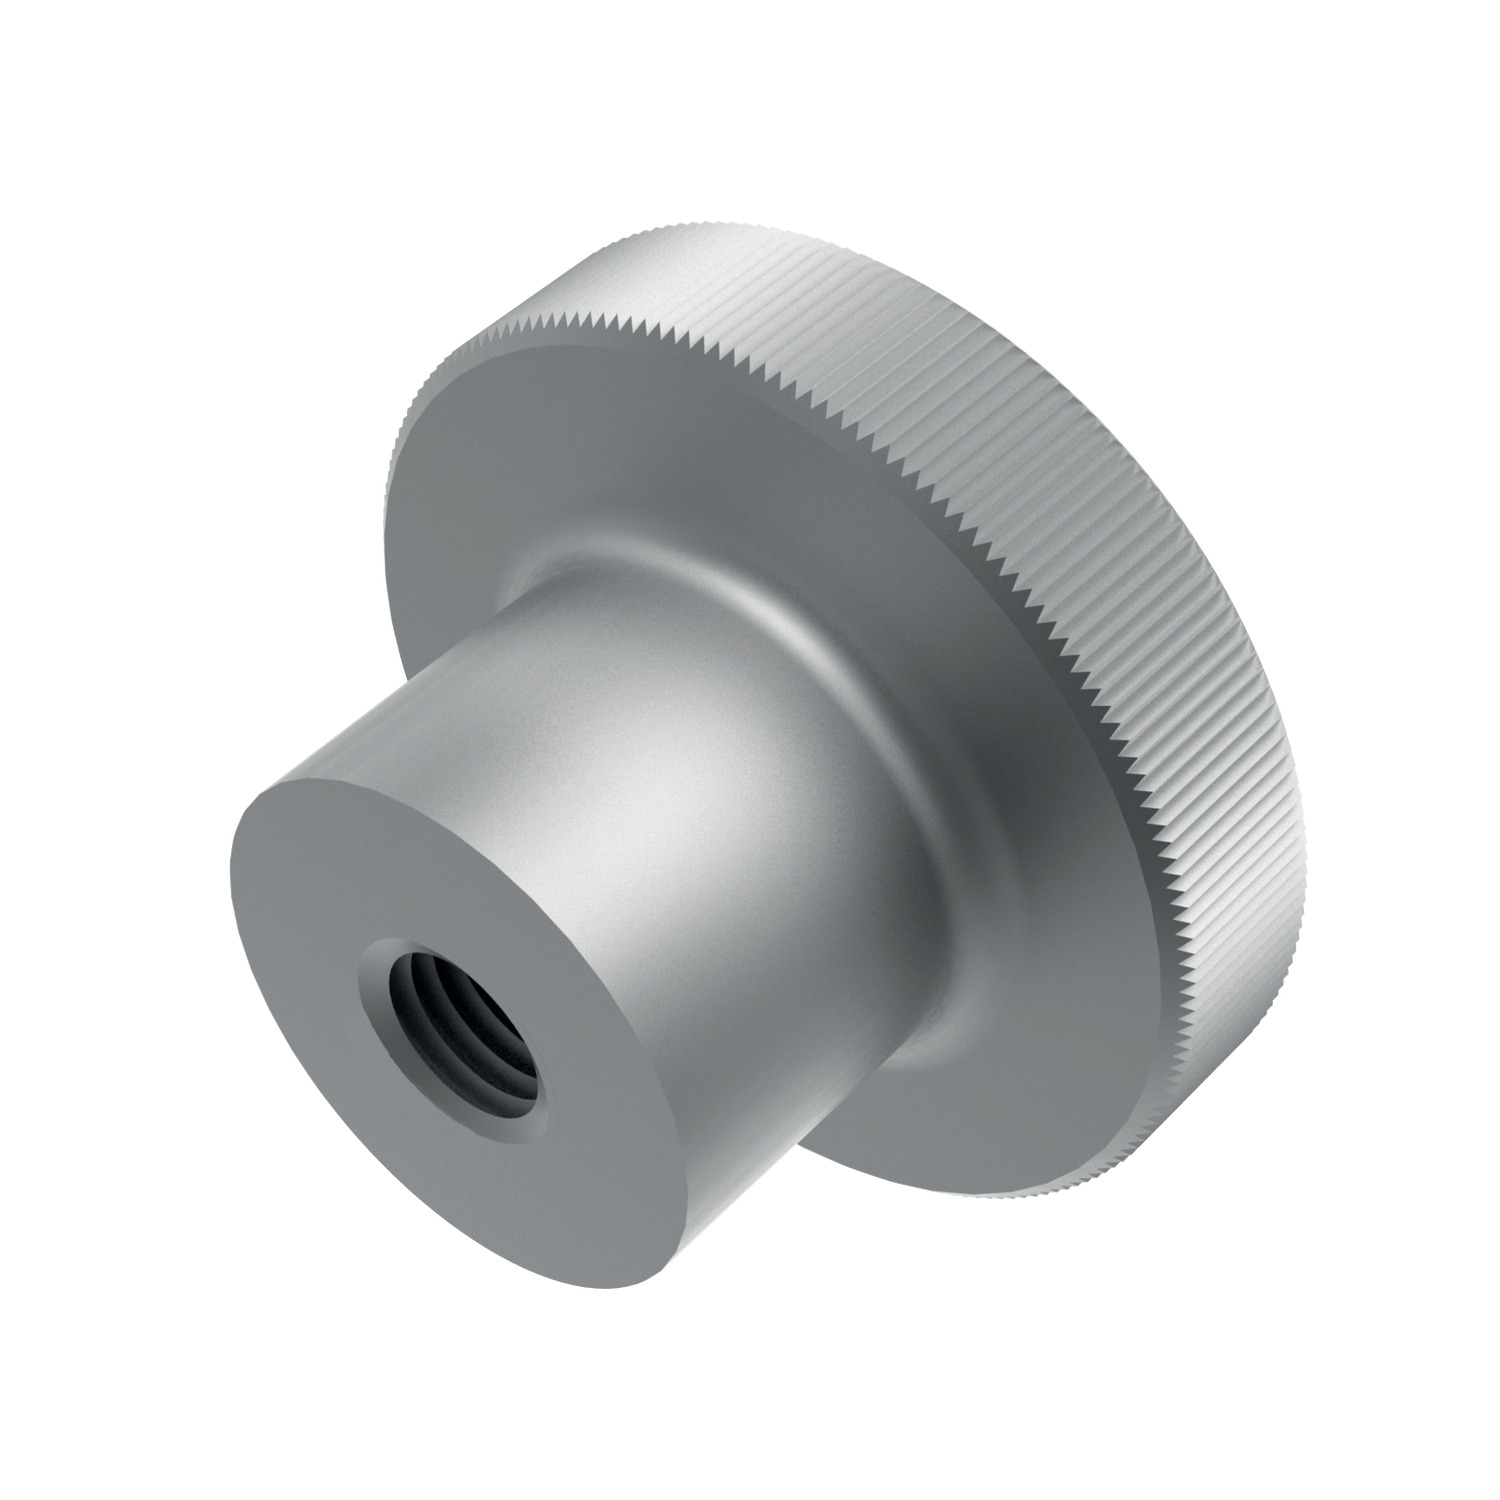 Knurled Thumb Nuts Thumb nuts are available in a wide range of shapes, sizes and material. For our full range, please click here.